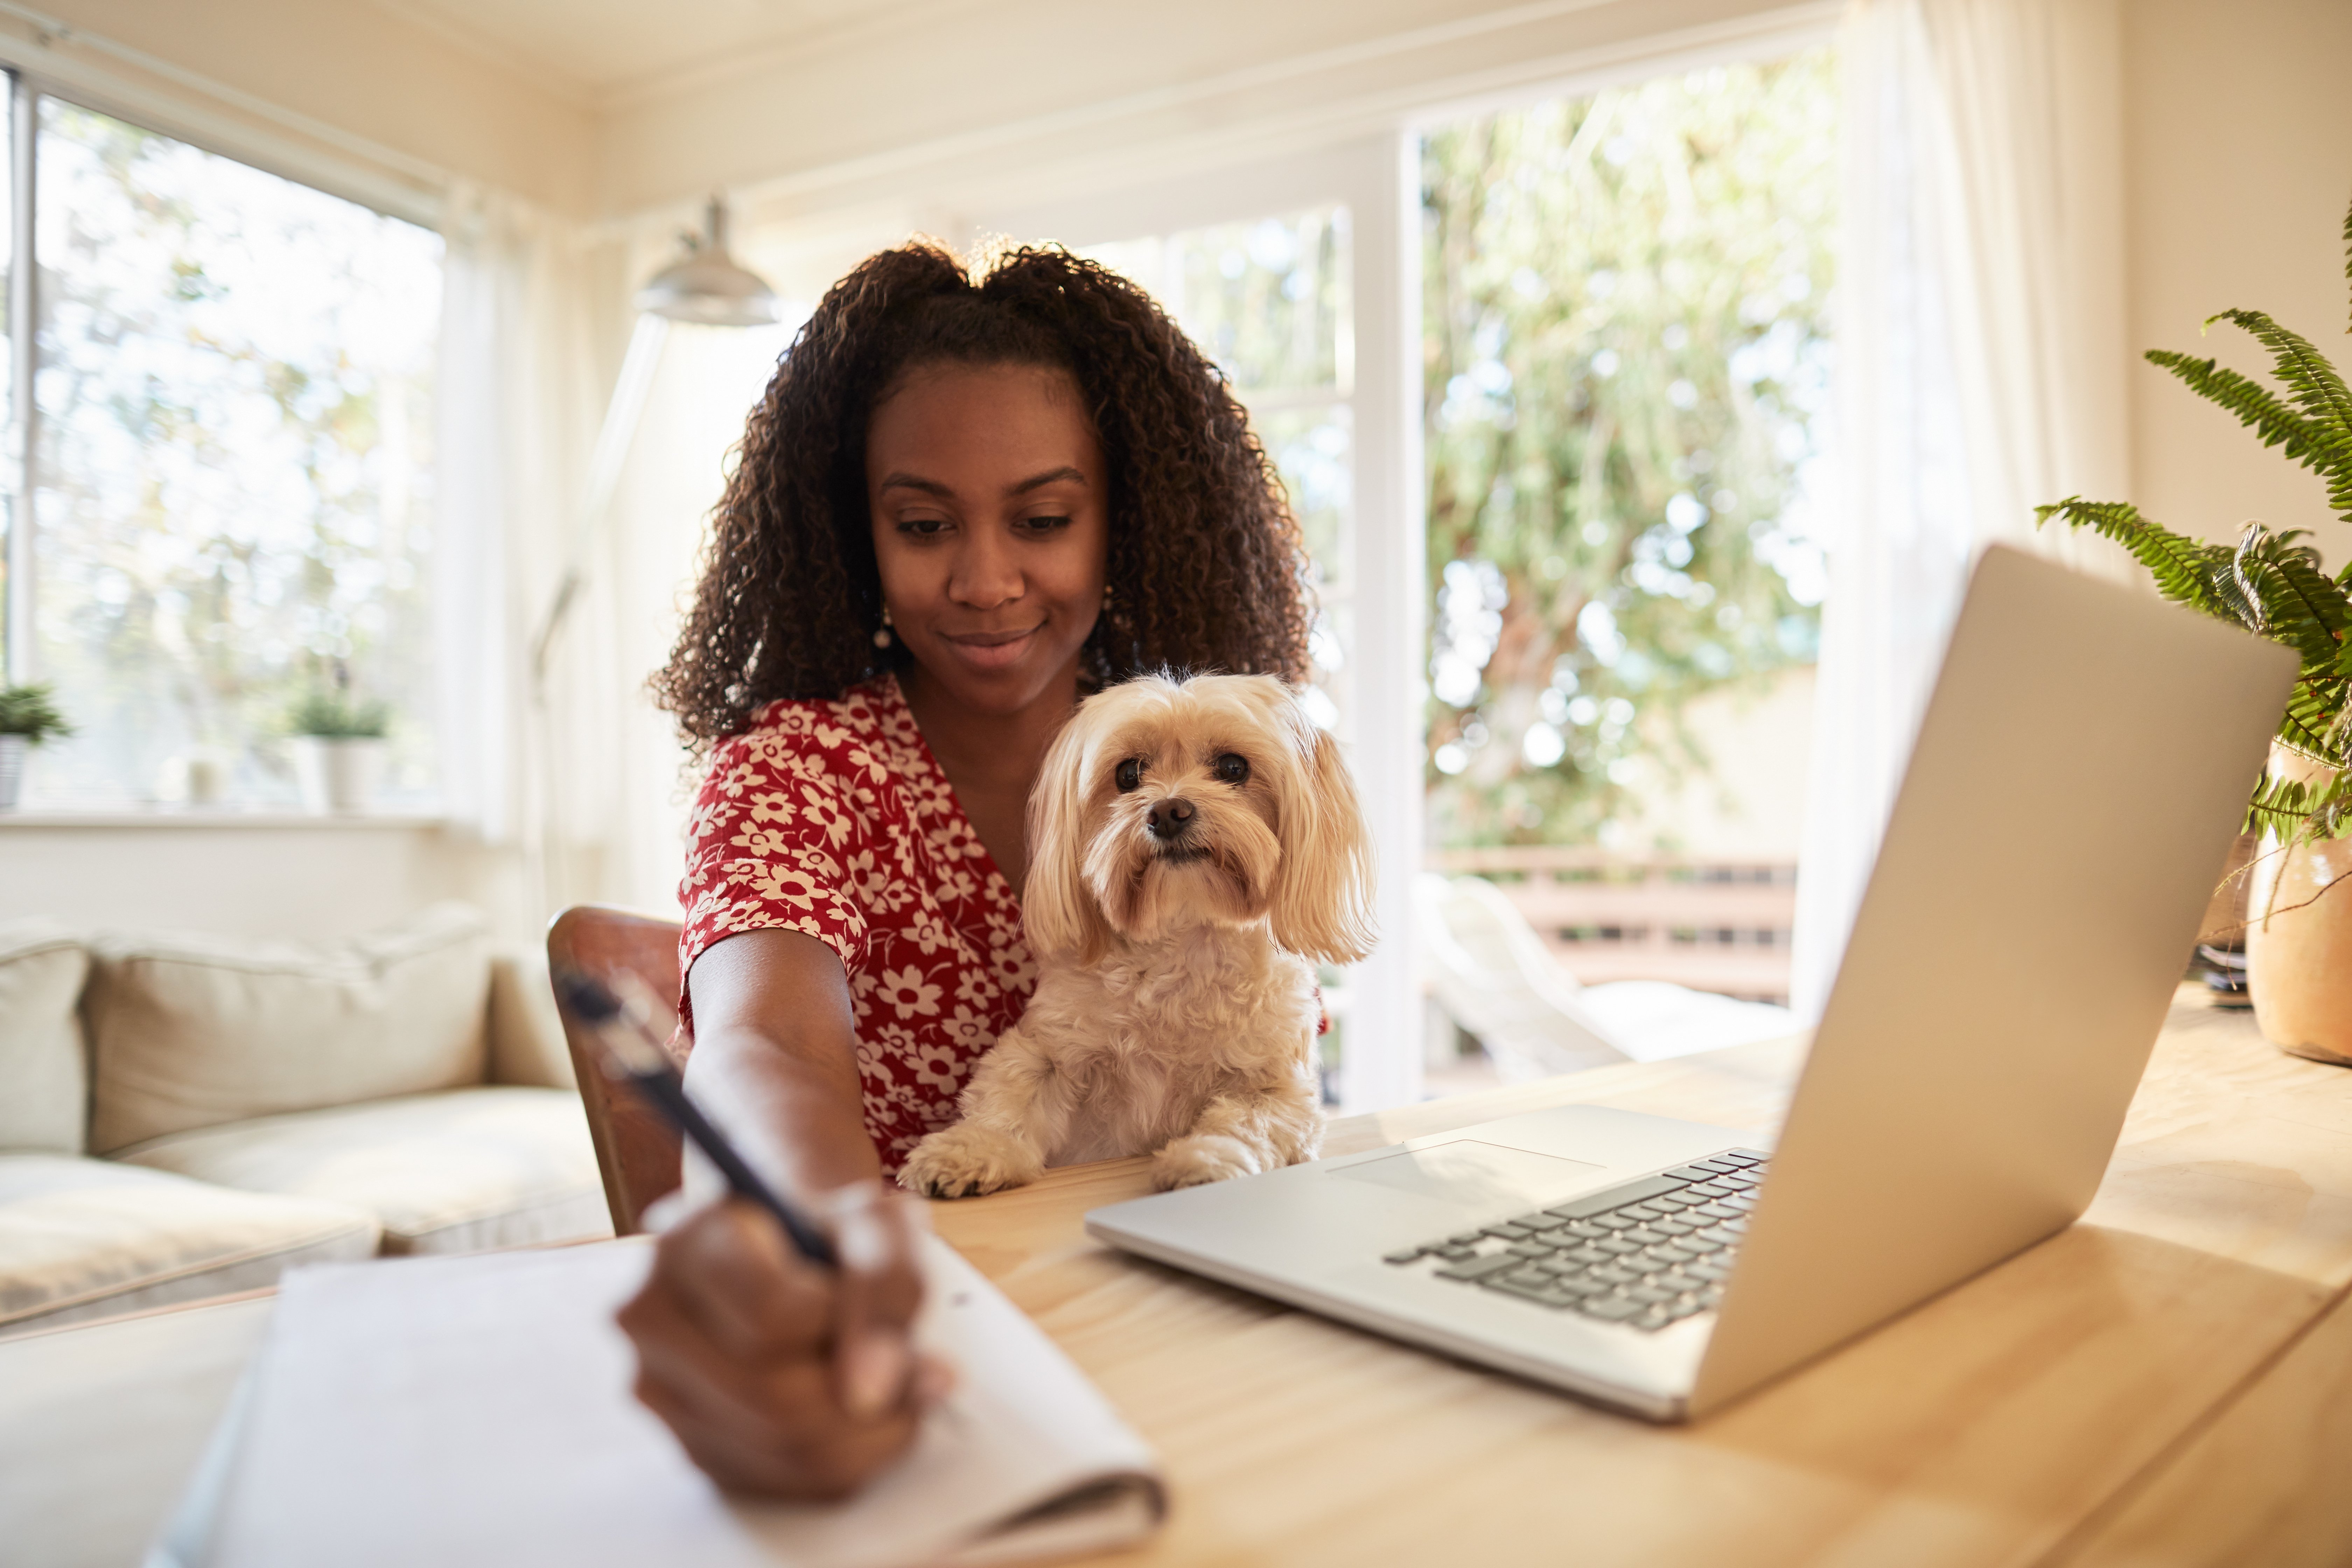 Our pet business software is dedicated to helping you spend more time with the animals in your care.